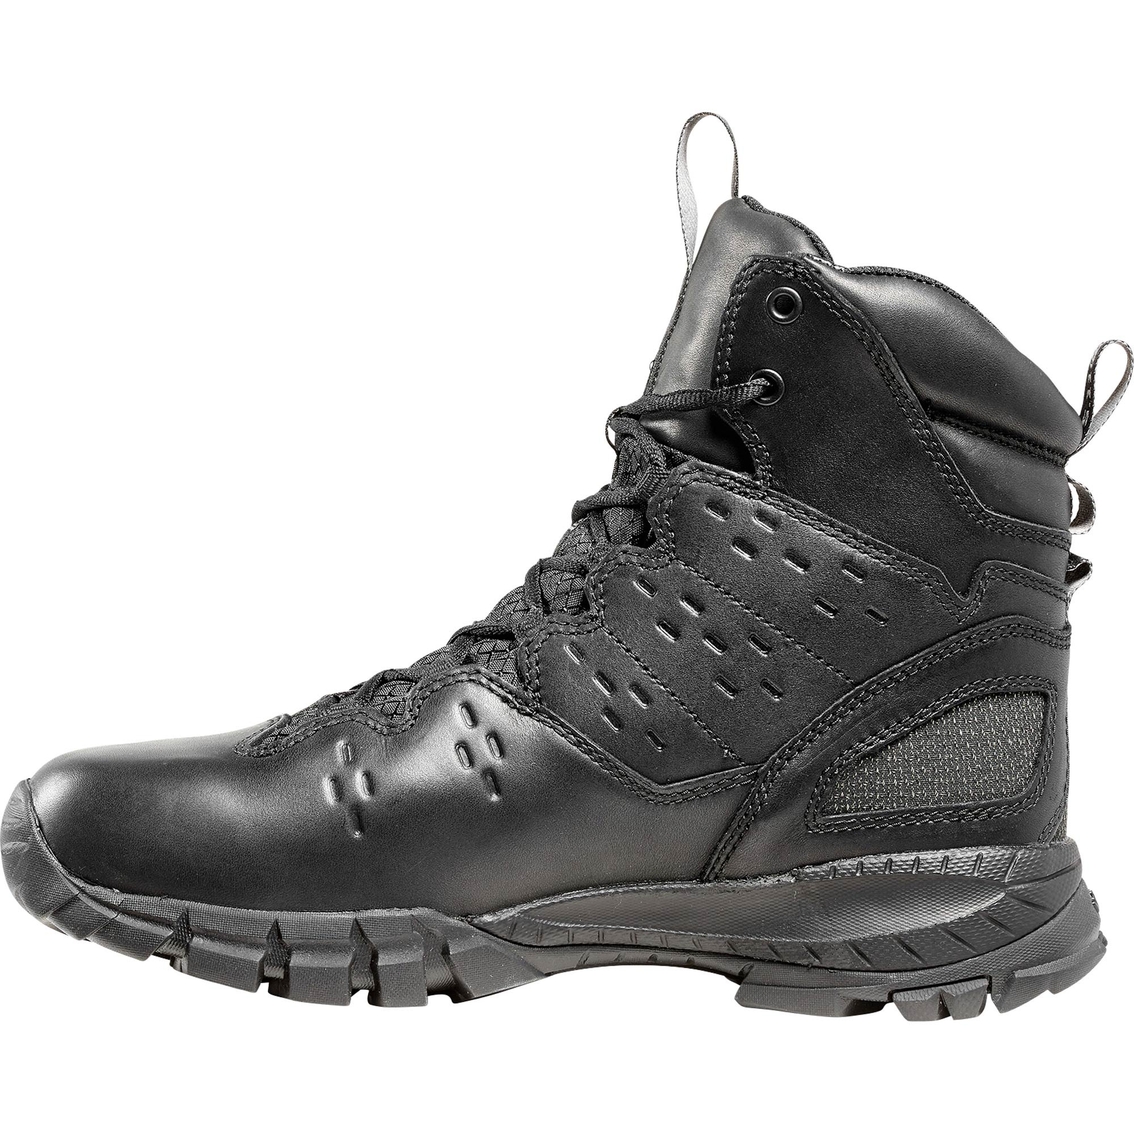 5.11 Men's Xprt 3.0 Black 6 in. Boots - Image 3 of 8